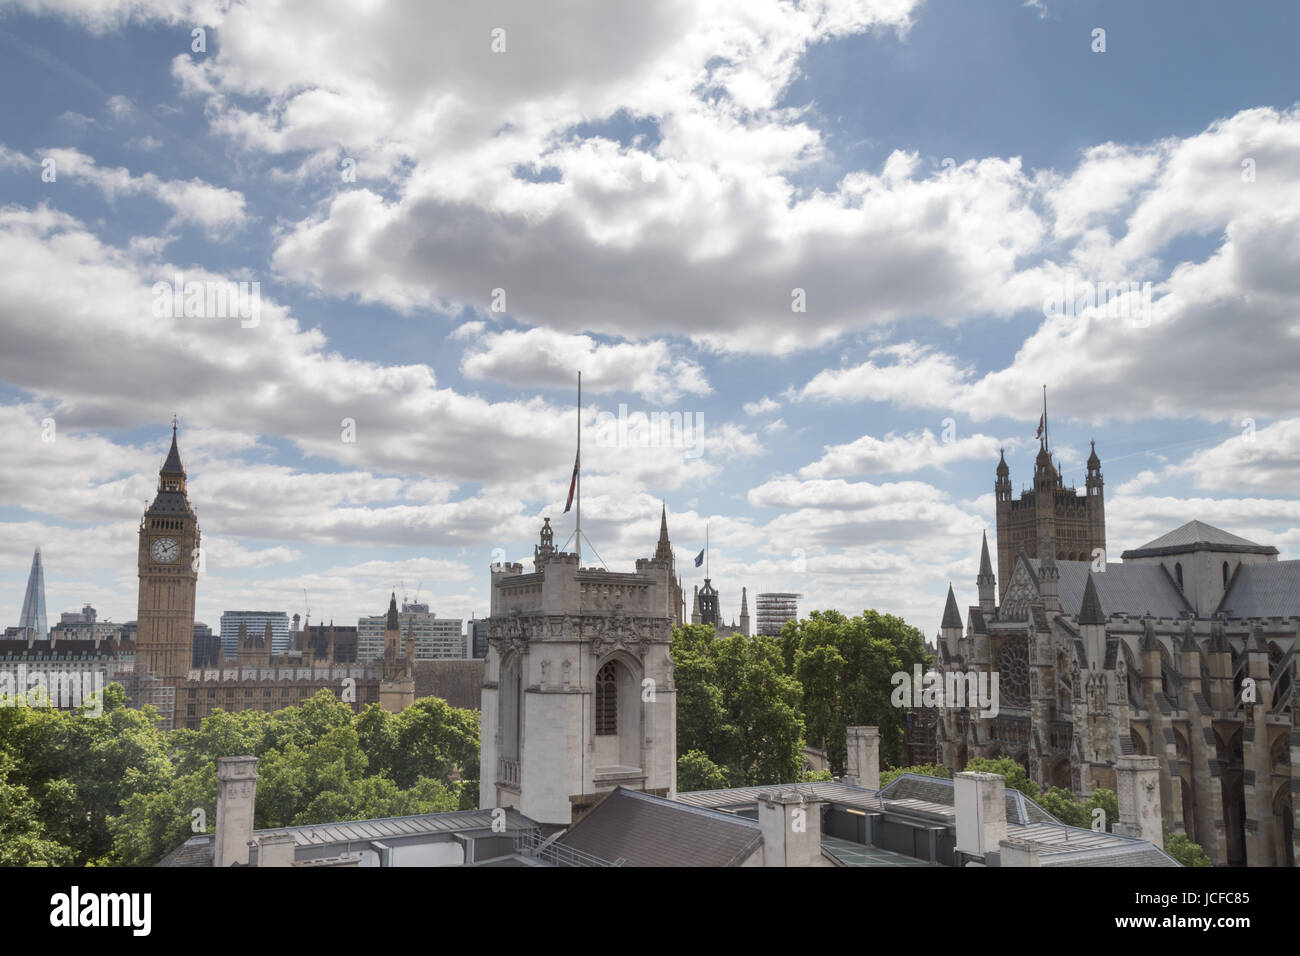 Westminister, UK. 16th June 2017. UK Weather: Mid morning clouds on warm day in London. View over London skyline with Big ben, parliamnet The Shard and London eye. Cumulonimbus clouds expected to clear for hot weekend Credit: WansfordPhoto/Alamy Live News Stock Photo